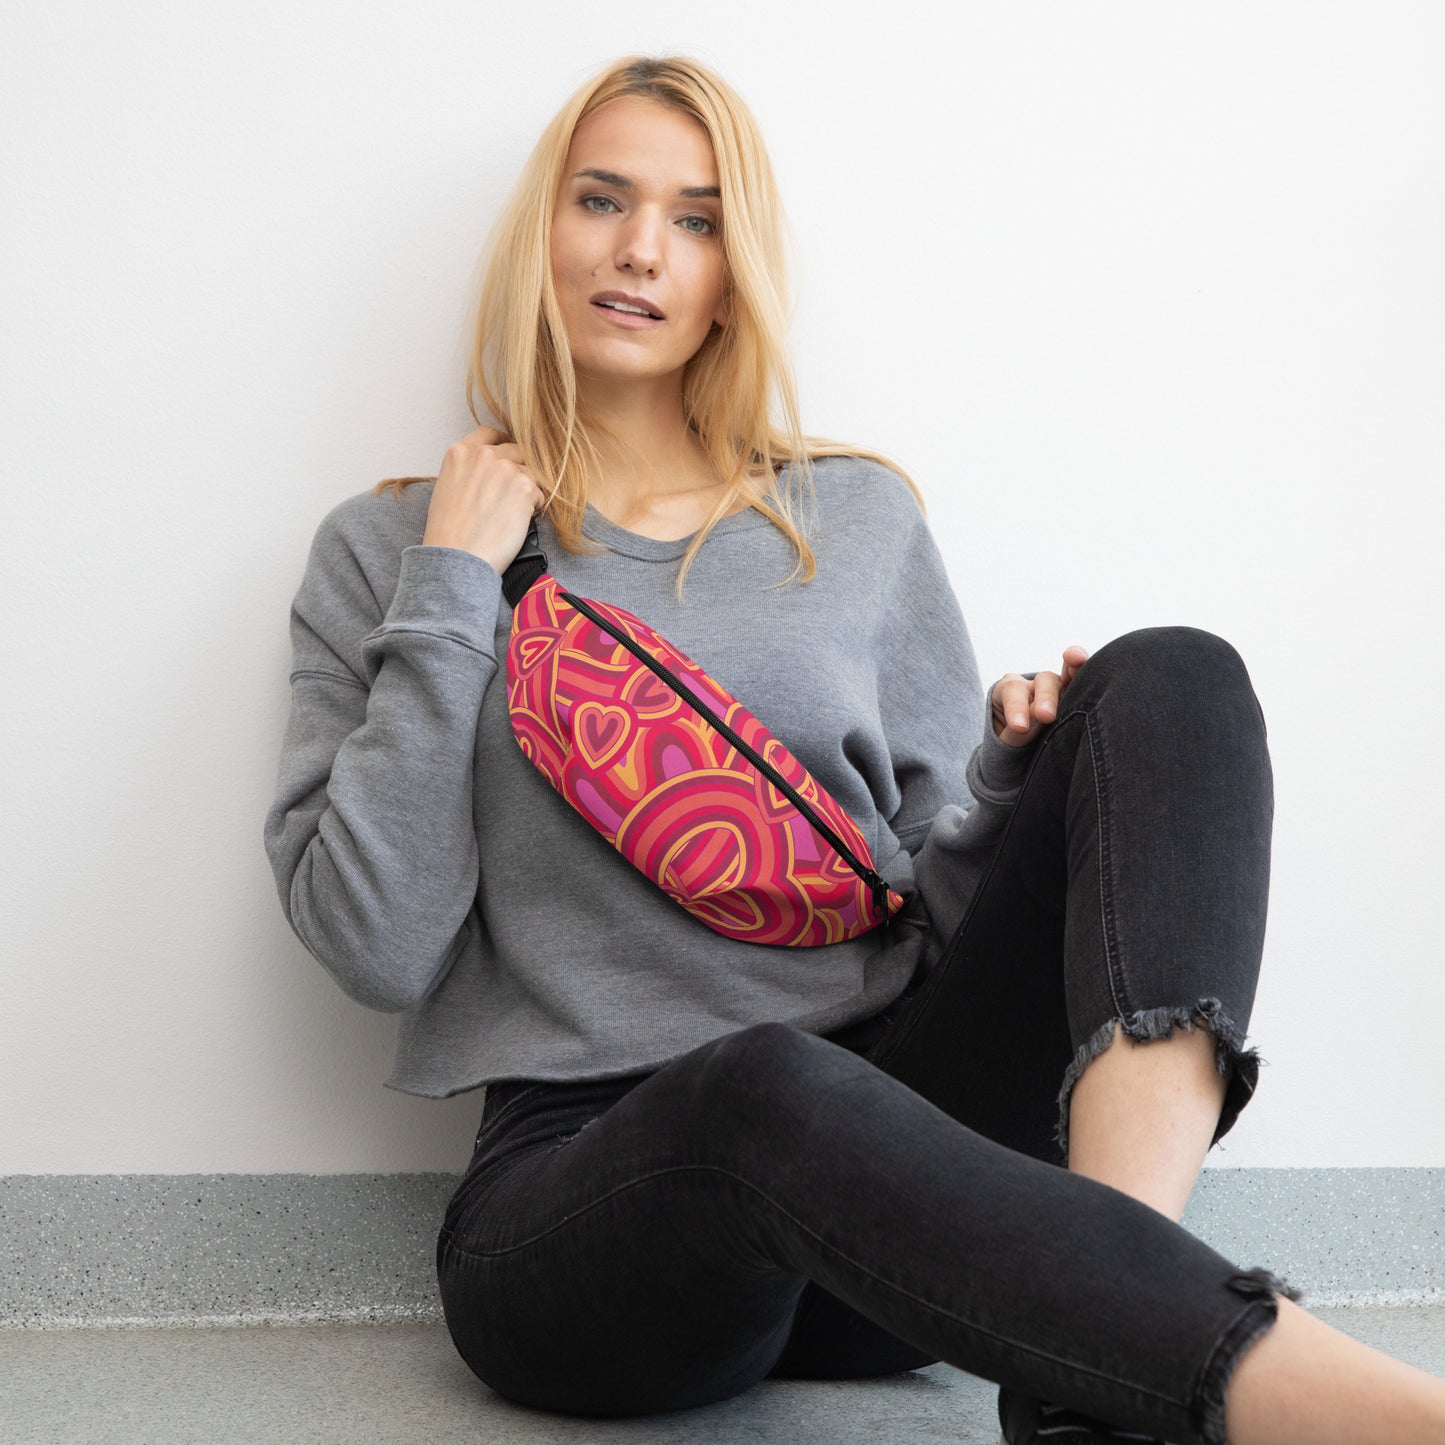 TIME OF VIBES - Fanny Pack FULL OF LOVE - €39.00